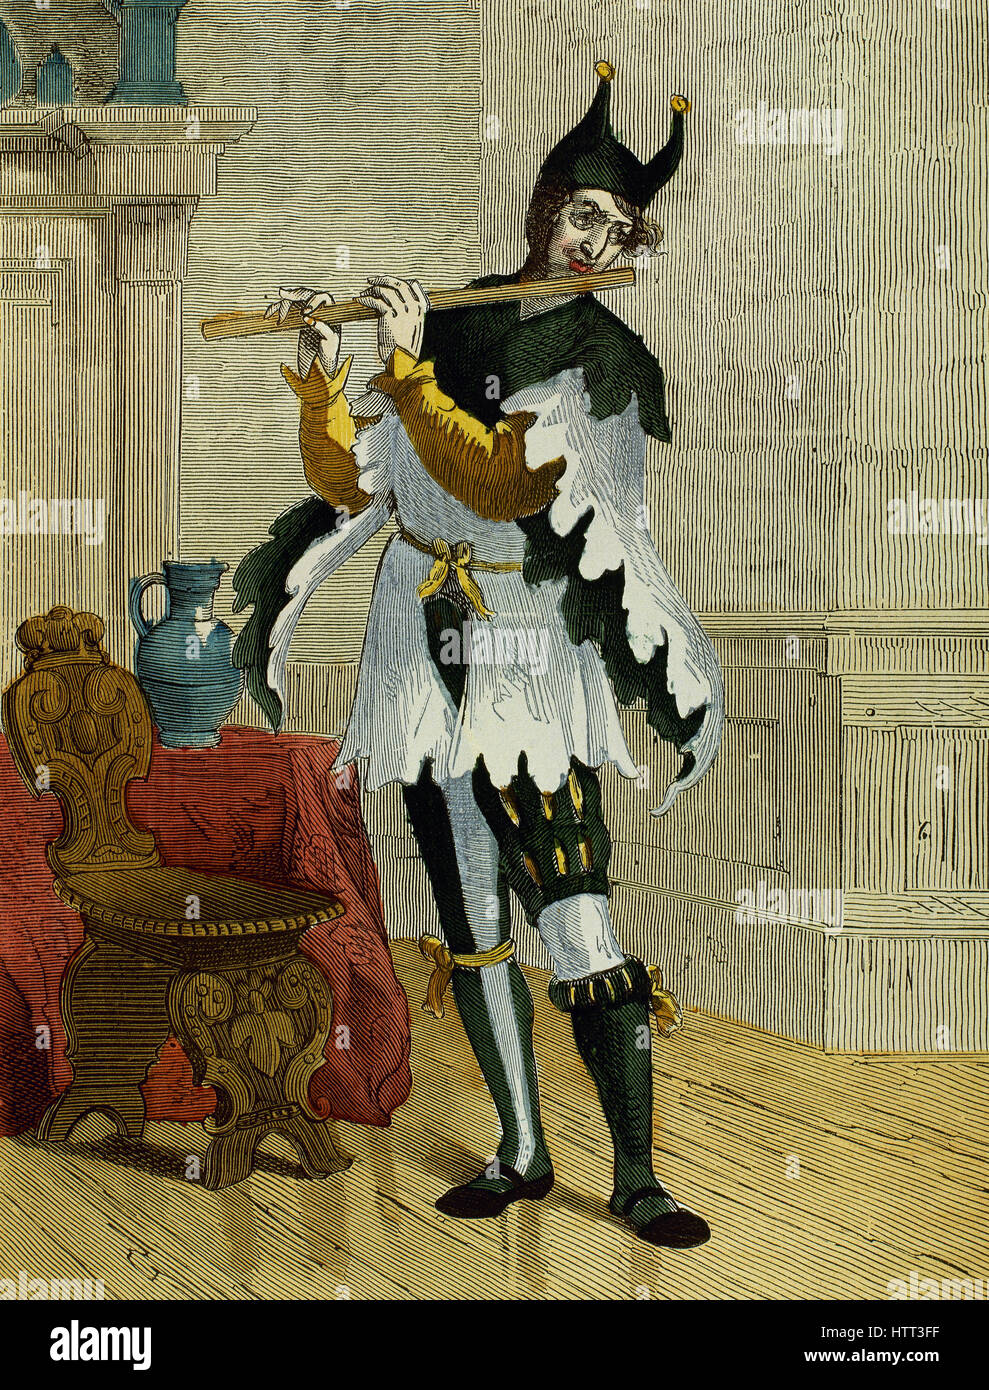 Jester playing the flute. 16th century. Engraving. Colored. Stock Photo